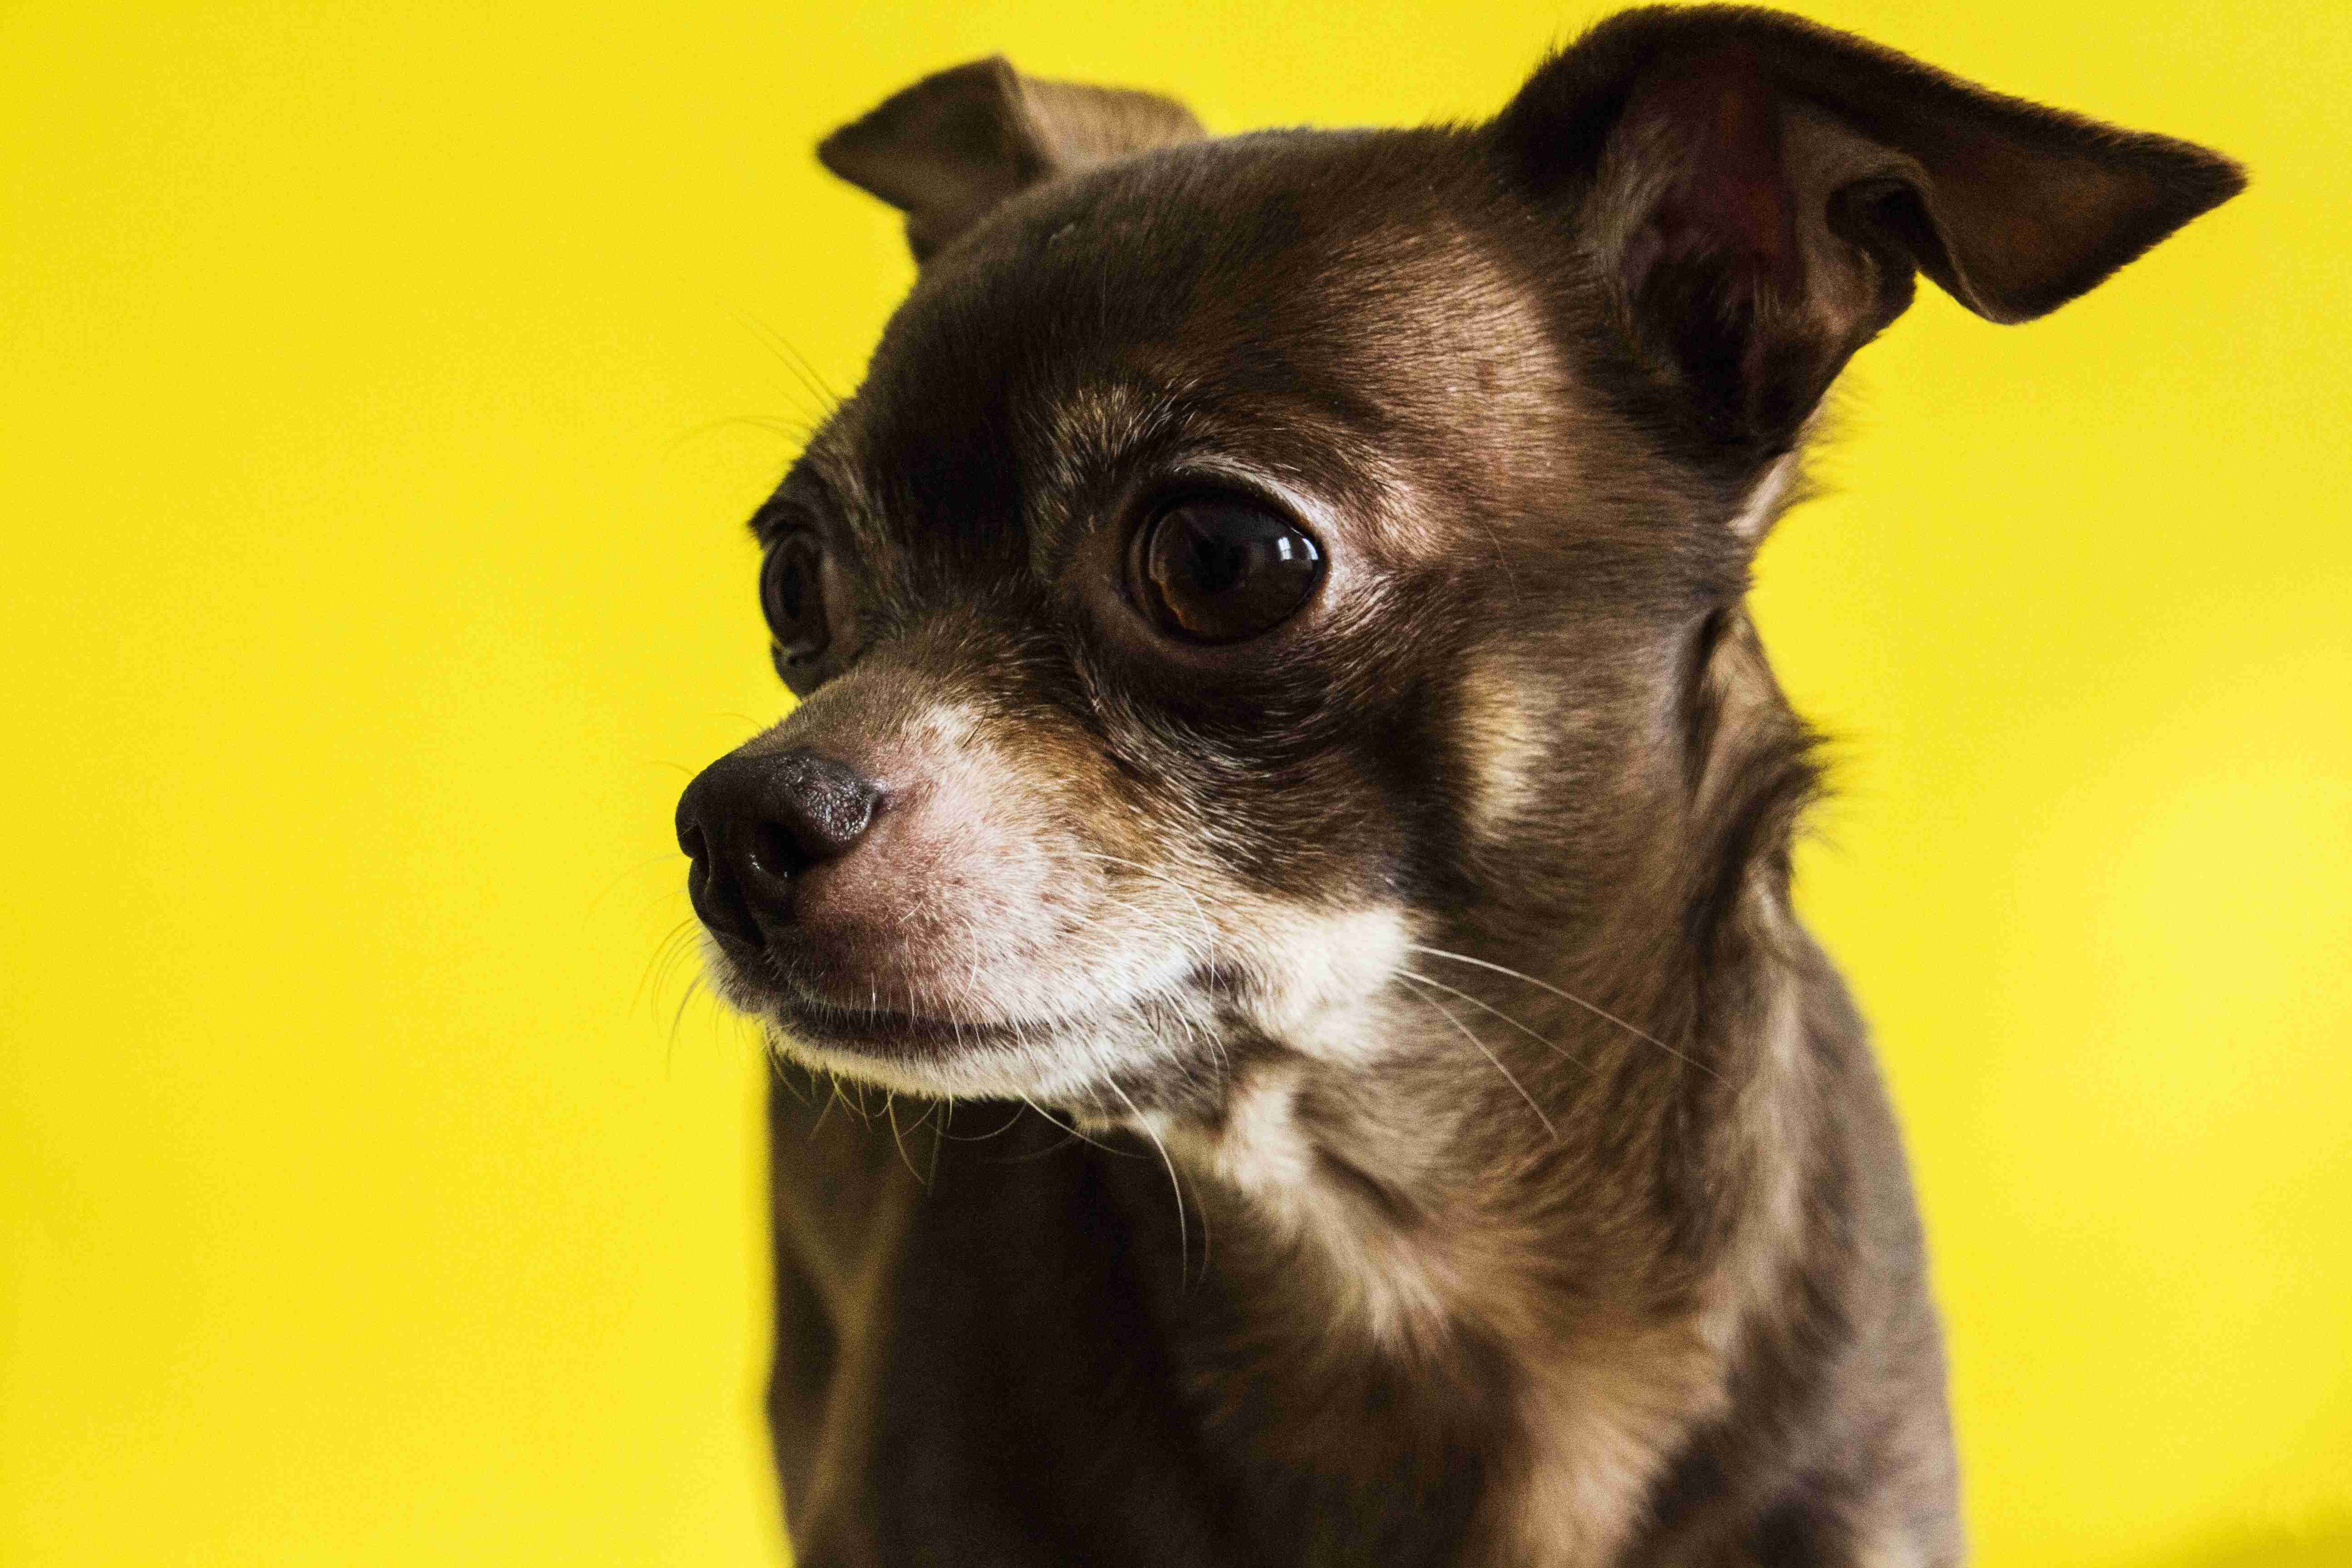 Can a Chihuahua's anger issues be exacerbated by lack of socialization or negative experiences?